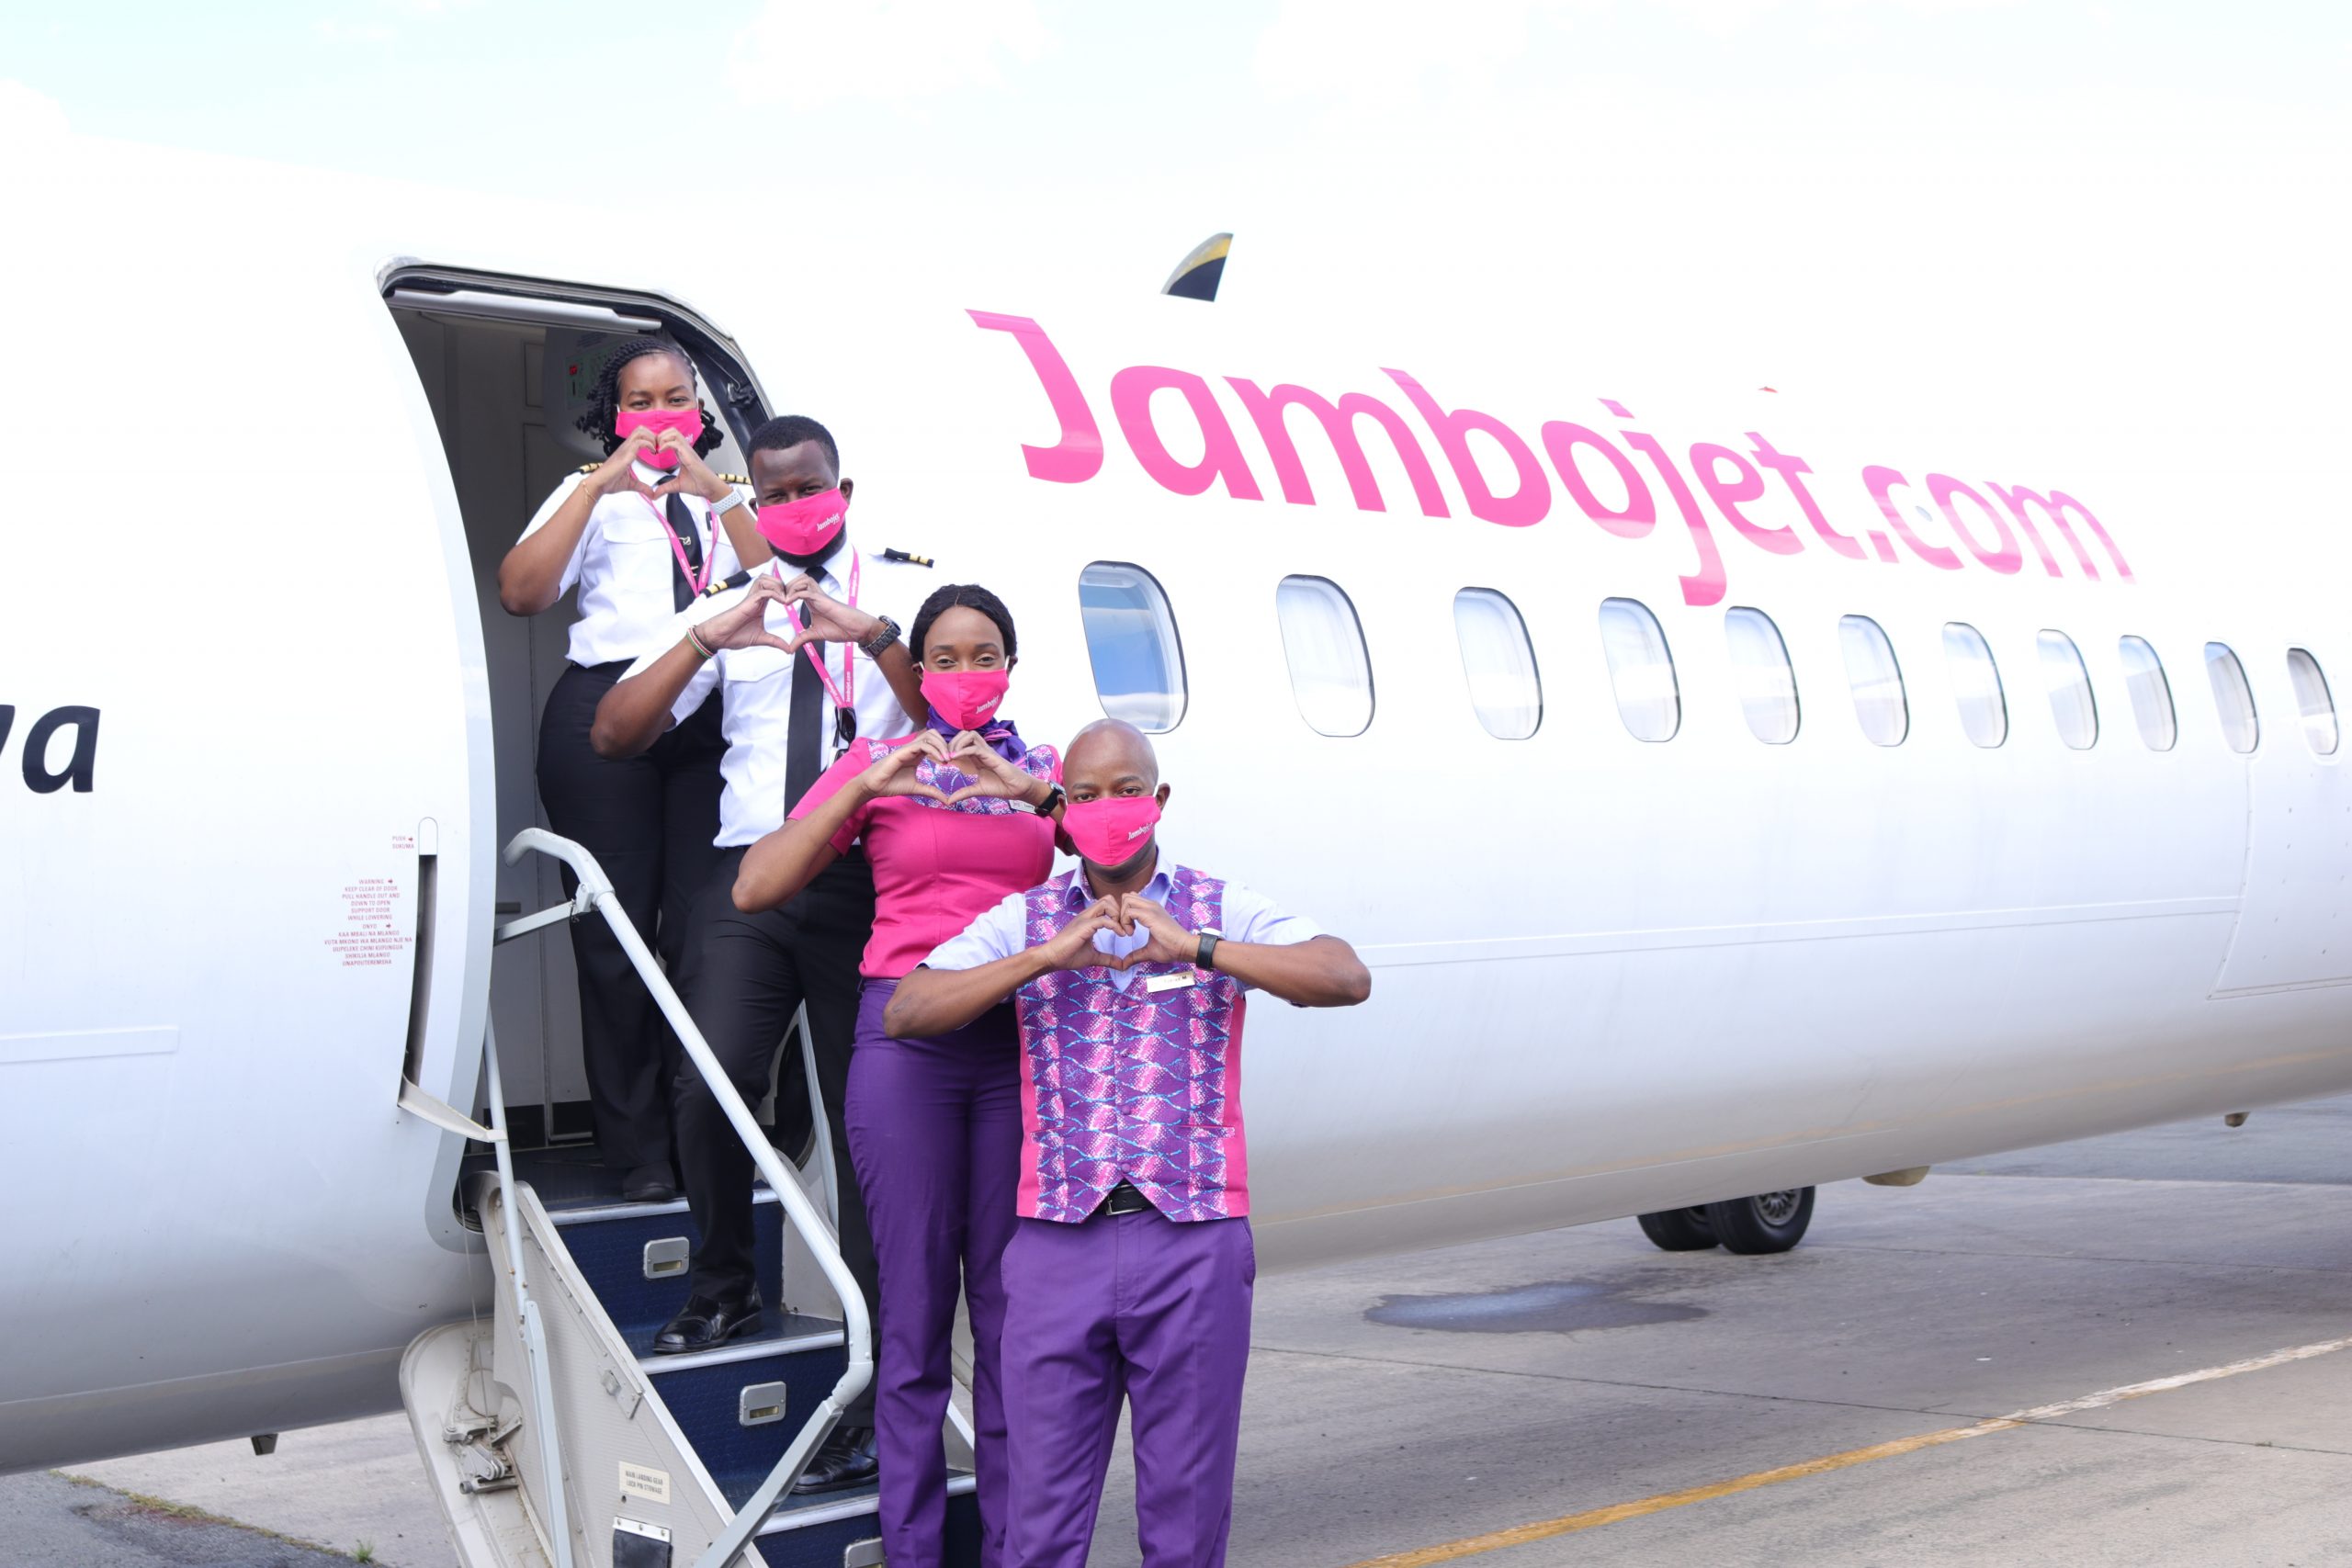 Jambojet launches cargo operations in its latest diversification strategy